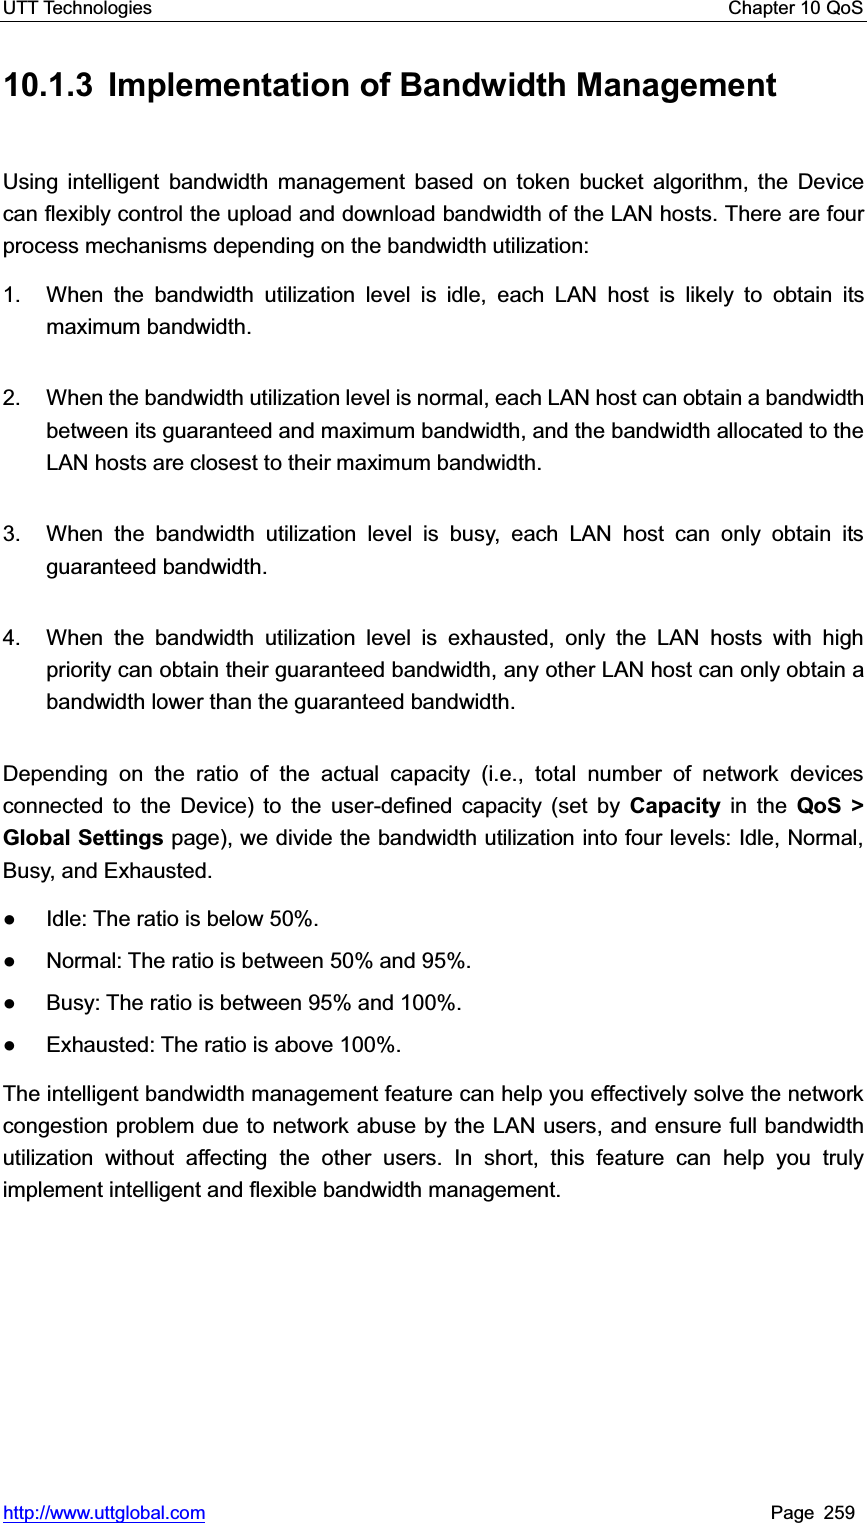 UTT Technologies    Chapter 10 QoS   http://www.uttglobal.com Page 259 10.1.3  Implementation of Bandwidth Management Using intelligent bandwidth management based on token bucket algorithm, the Device can flexibly control the upload and download bandwidth of the LAN hosts. There are four process mechanisms depending on the bandwidth utilization: 1.  When the bandwidth utilization level is idle, each LAN host is likely to obtain its maximum bandwidth. 2.  When the bandwidth utilization level is normal, each LAN host can obtain a bandwidth between its guaranteed and maximum bandwidth, and the bandwidth allocated to the LAN hosts are closest to their maximum bandwidth. 3.  When the bandwidth utilization level is busy, each LAN host can only obtain its guaranteed bandwidth. 4.  When the bandwidth utilization level is exhausted, only the LAN hosts with high priority can obtain their guaranteed bandwidth, any other LAN host can only obtain a bandwidth lower than the guaranteed bandwidth. Depending on the ratio of the actual capacity (i.e., total number of network devicesconnected to the Device) to the user-defined capacity (set by Capacity in the QoS &gt; Global Settings page), we divide the bandwidth utilization into four levels: Idle, Normal, Busy, and Exhausted.   Ɣ  Idle: The ratio is below 50%.   Ɣ  Normal: The ratio is between 50% and 95%. Ɣ  Busy: The ratio is between 95% and 100%. Ɣ  Exhausted: The ratio is above 100%. The intelligent bandwidth management feature can help you effectively solve the network congestion problem due to network abuse by the LAN users, and ensure full bandwidth utilization without affecting the other users. In short, this feature can help you truly implement intelligent and flexible bandwidth management.   